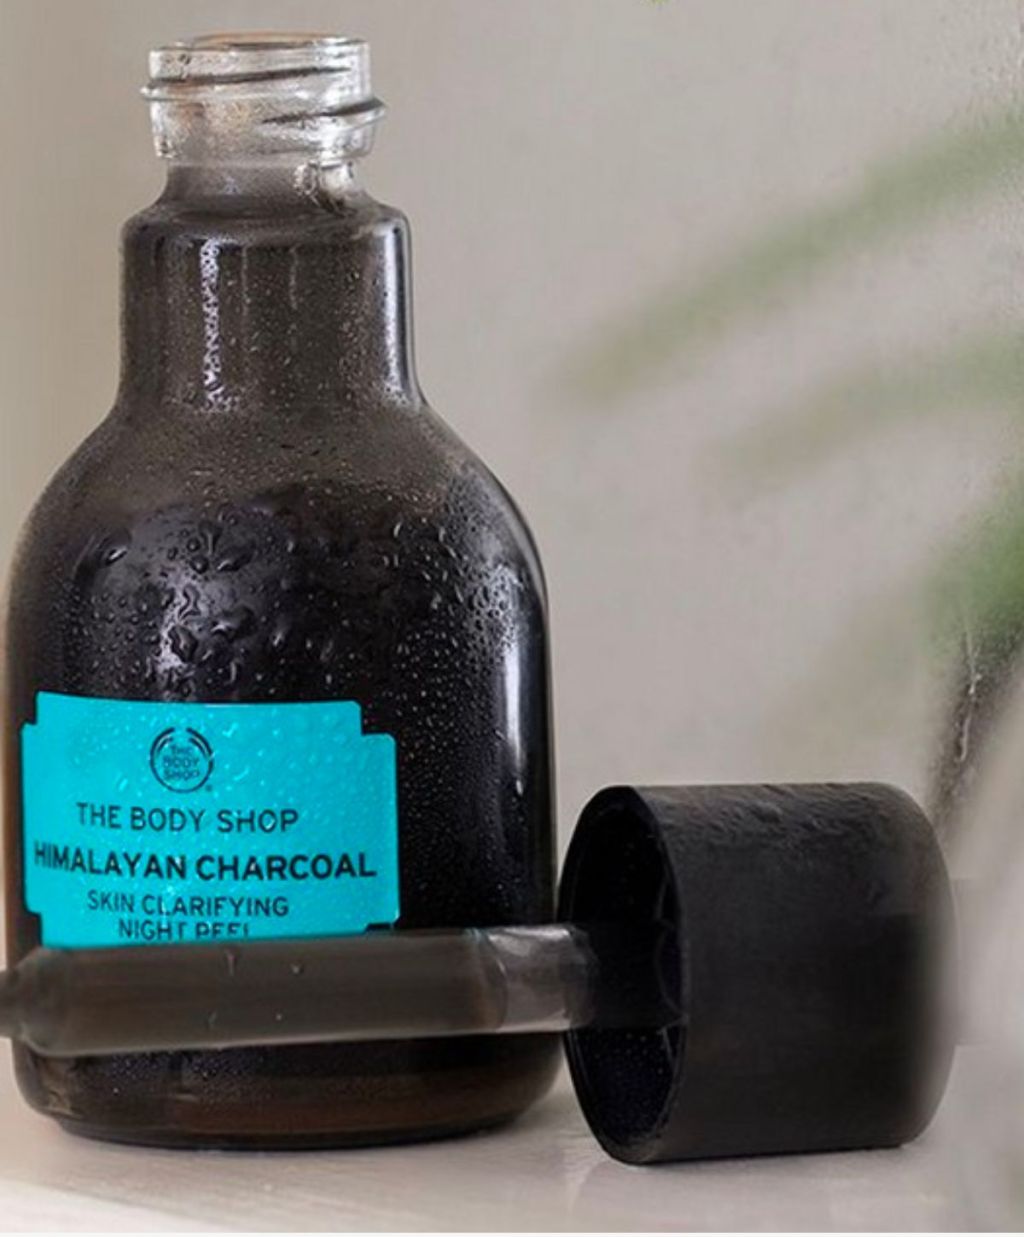 close up of a bottle of Body shop himalayan charcoal night peel sitting on a bathroom counter